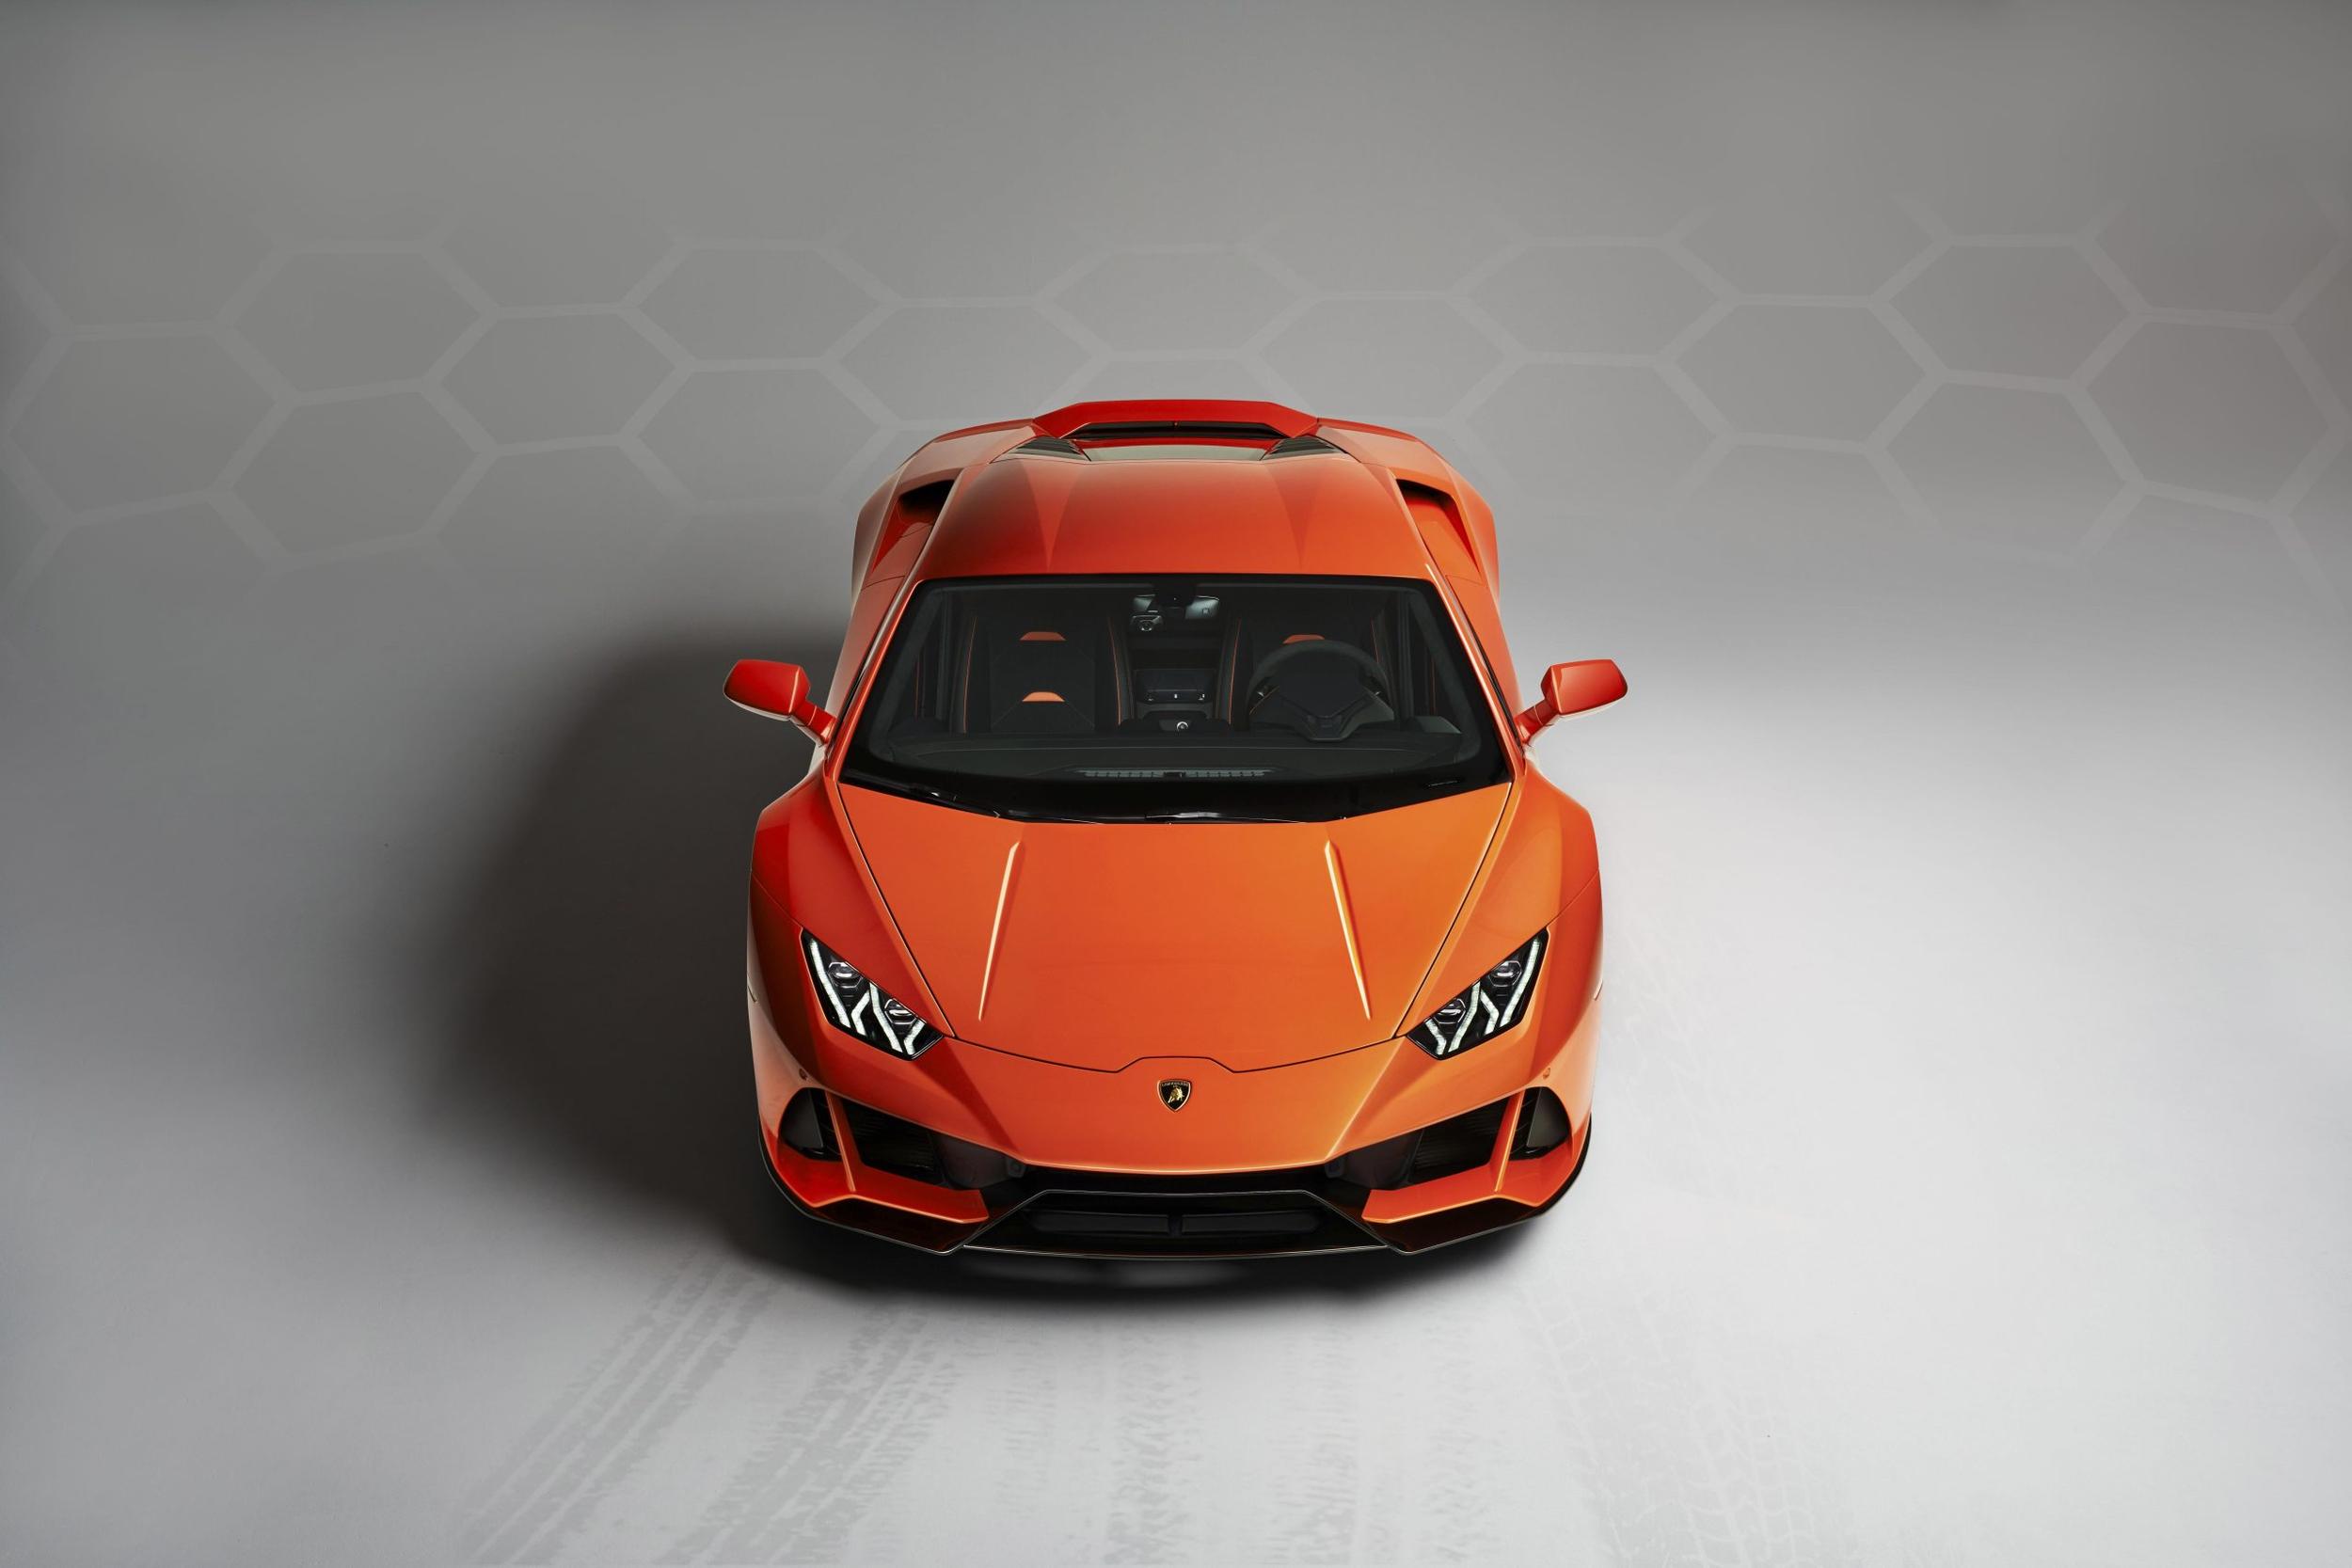 How much does a lamborghini huracan oil change cost?